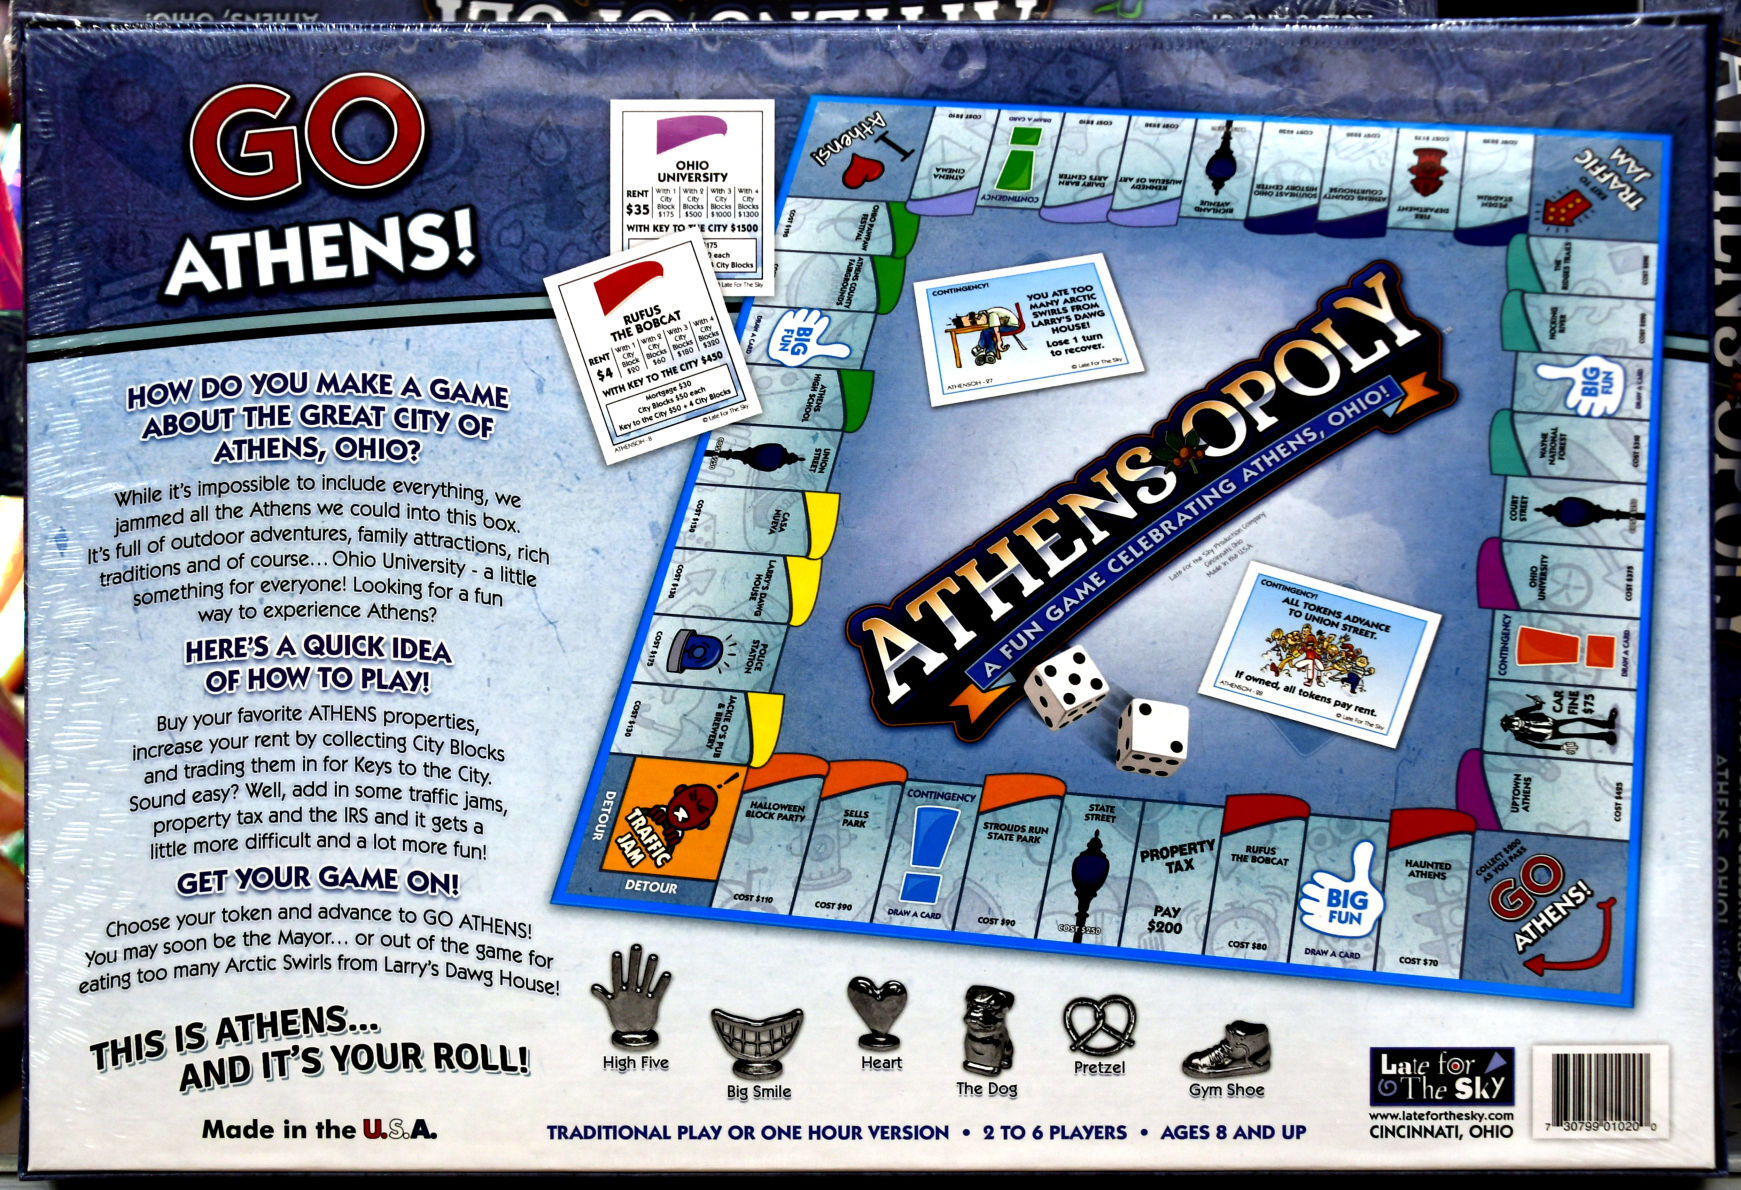 why should it matter legally whether professor anspach is correct that hasbro’s monopoly game